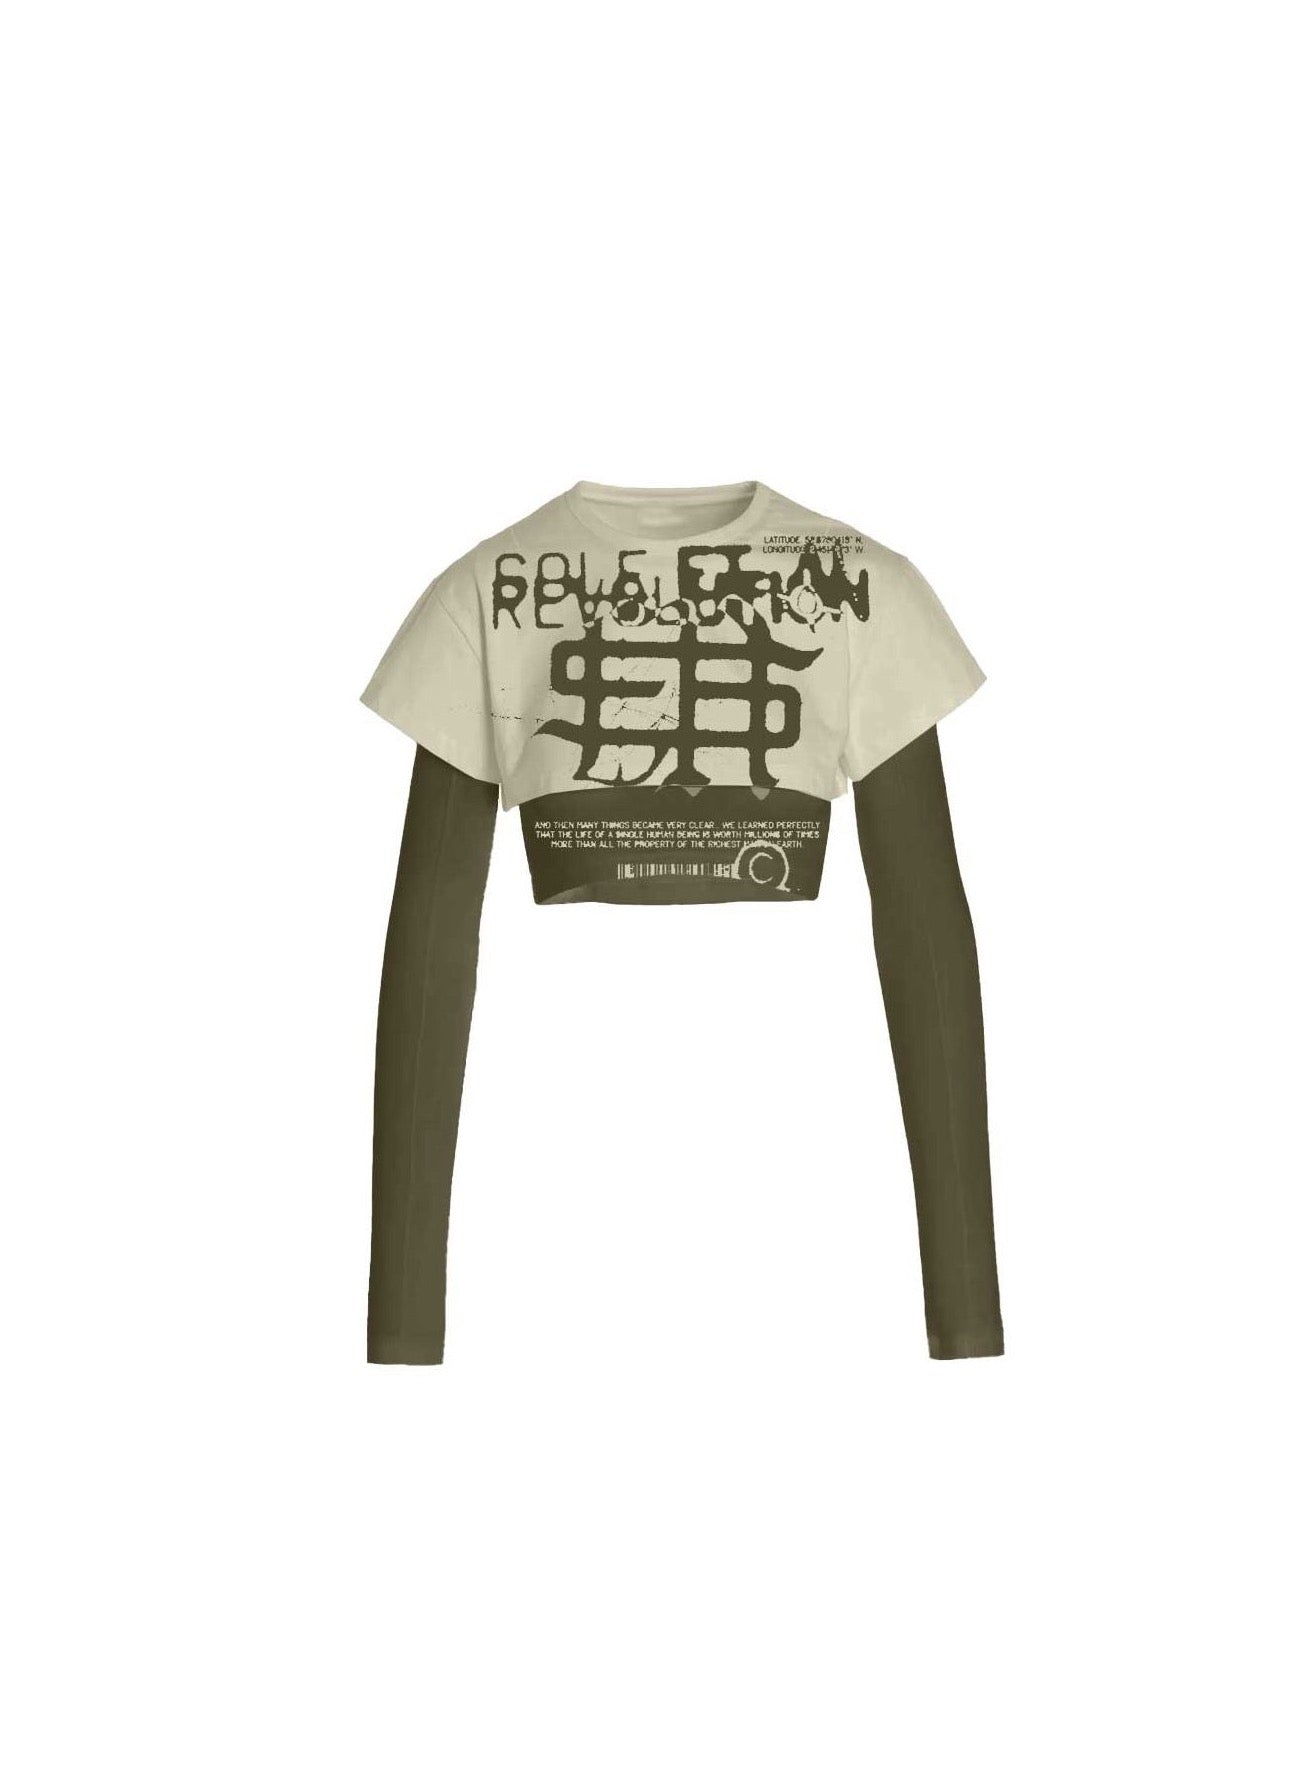 Sole et. Al Women's Revølutiøn Double Layered Cropped Tee : Sand / Military Green